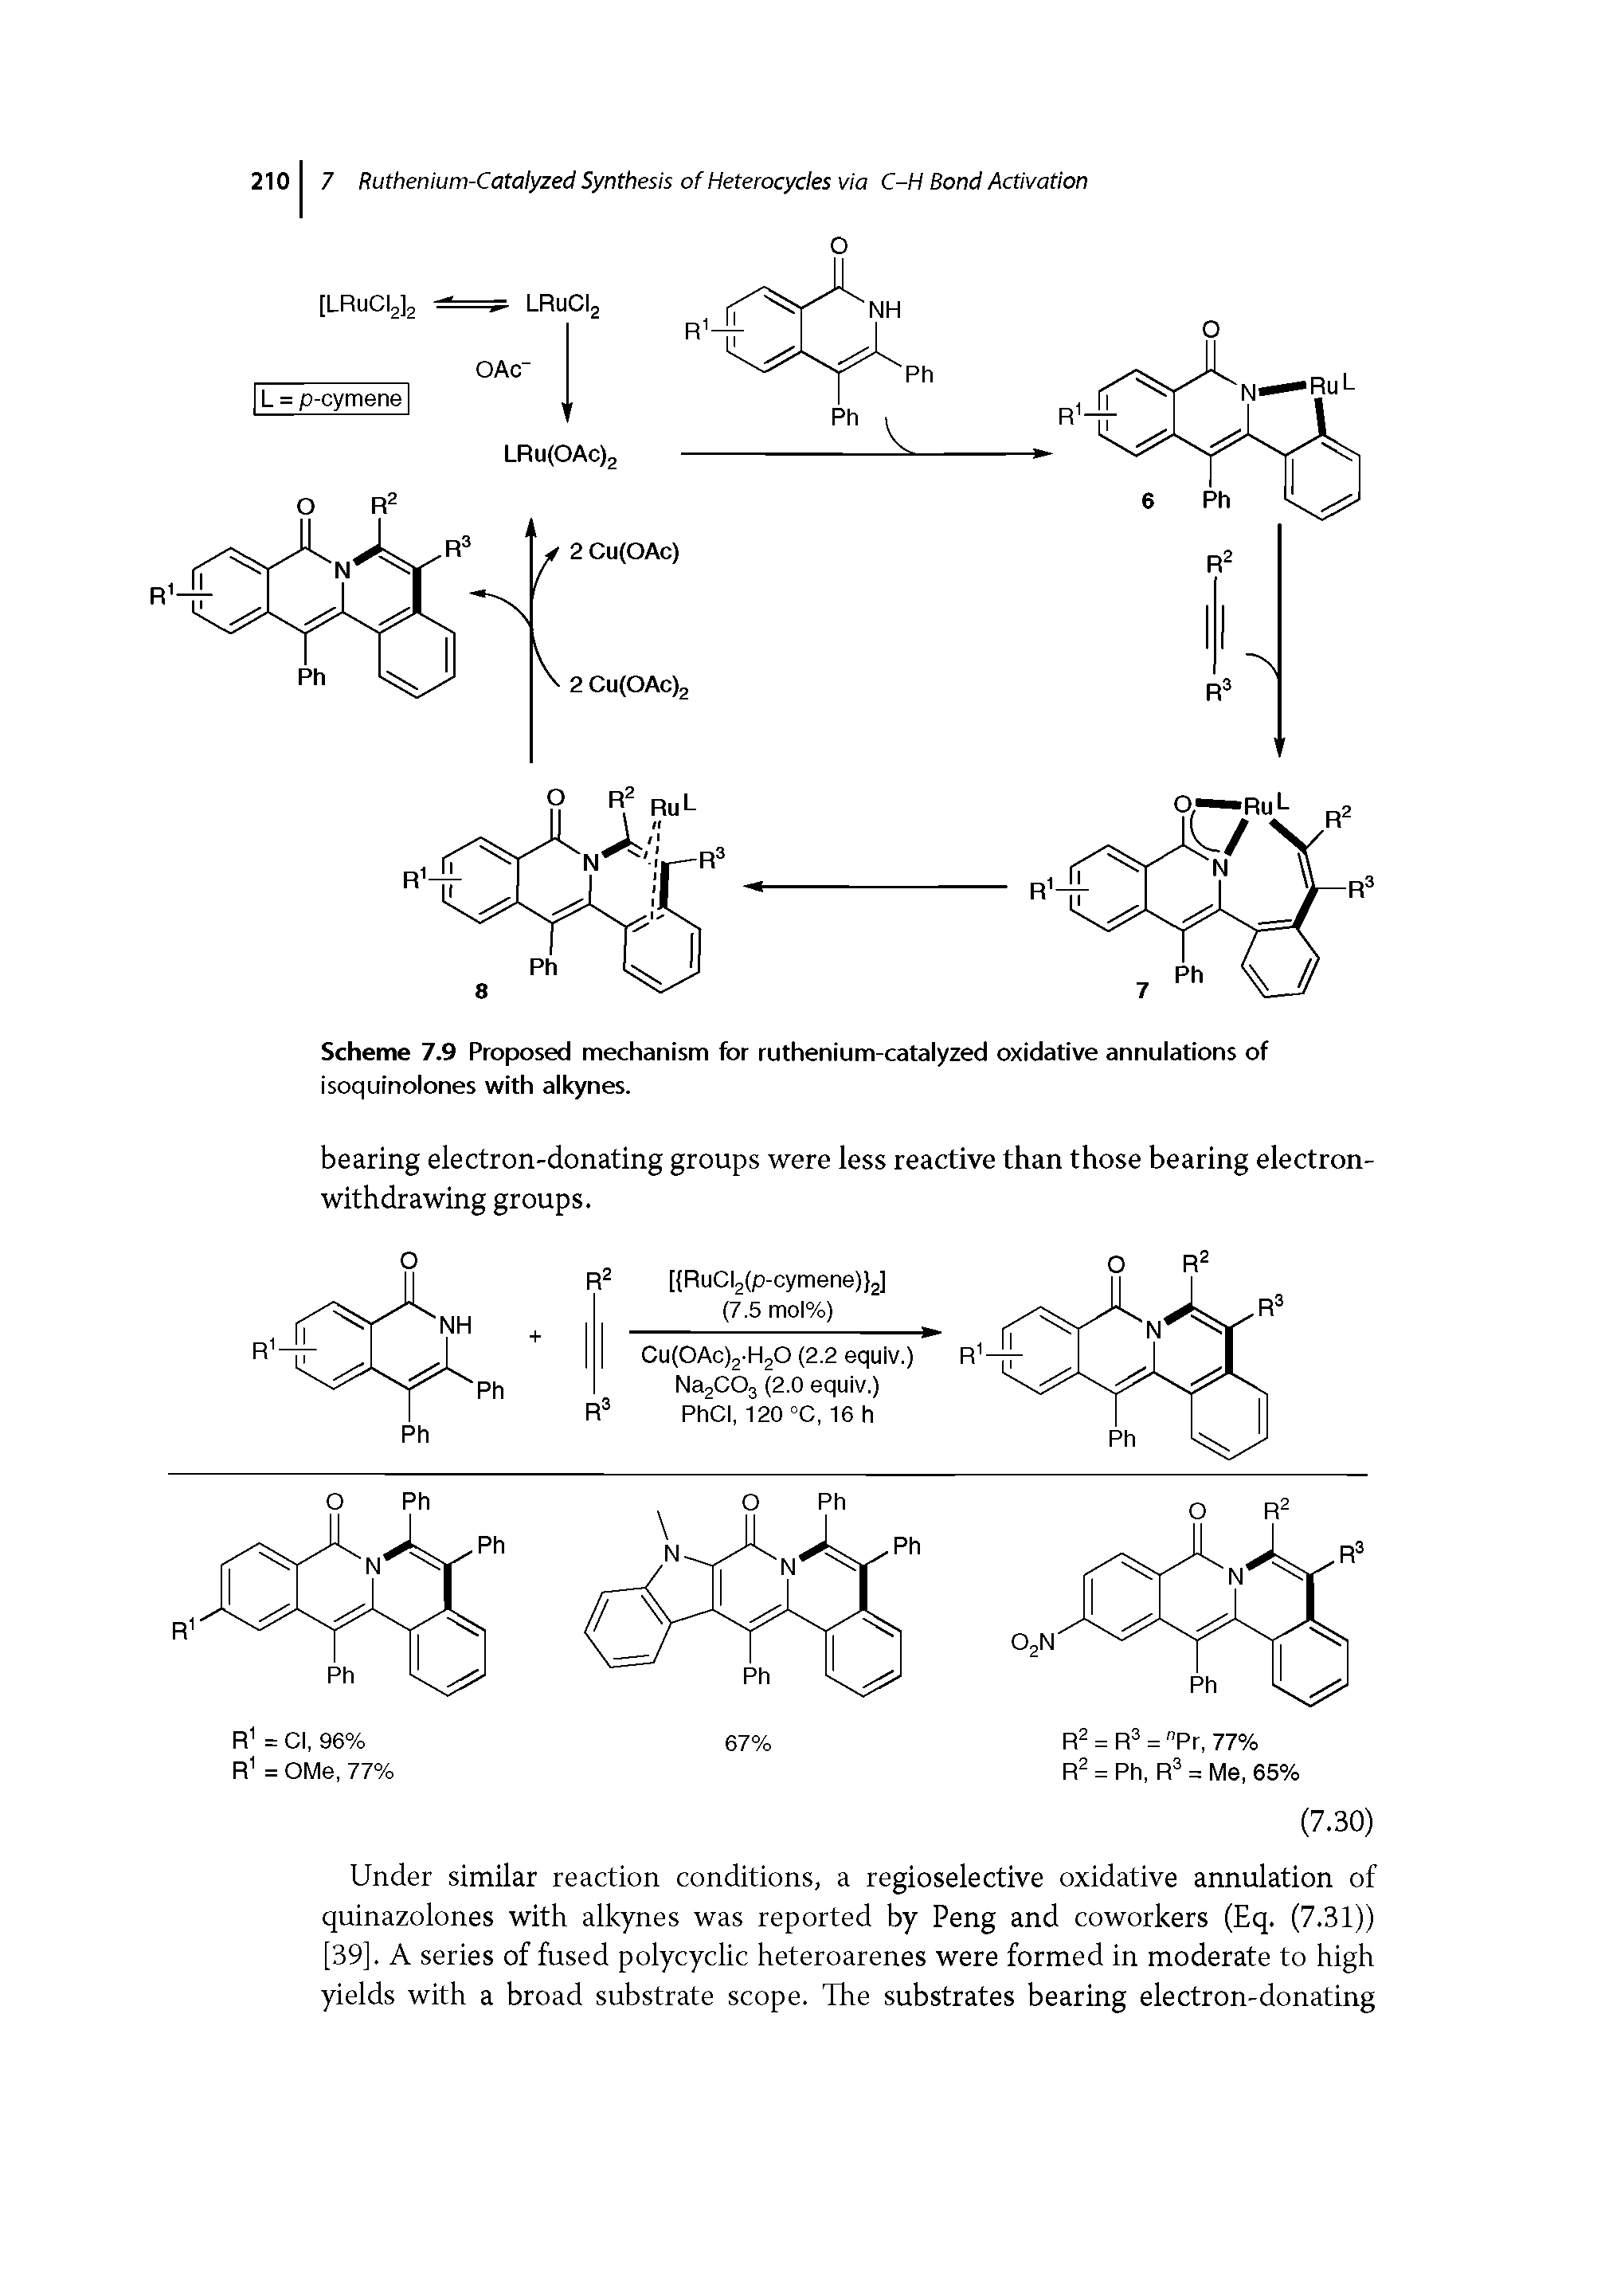 Scheme 7.9 Proposed mechanism for ruthenium-catalyzed oxidative annulations of isoquinolones with alkynes.